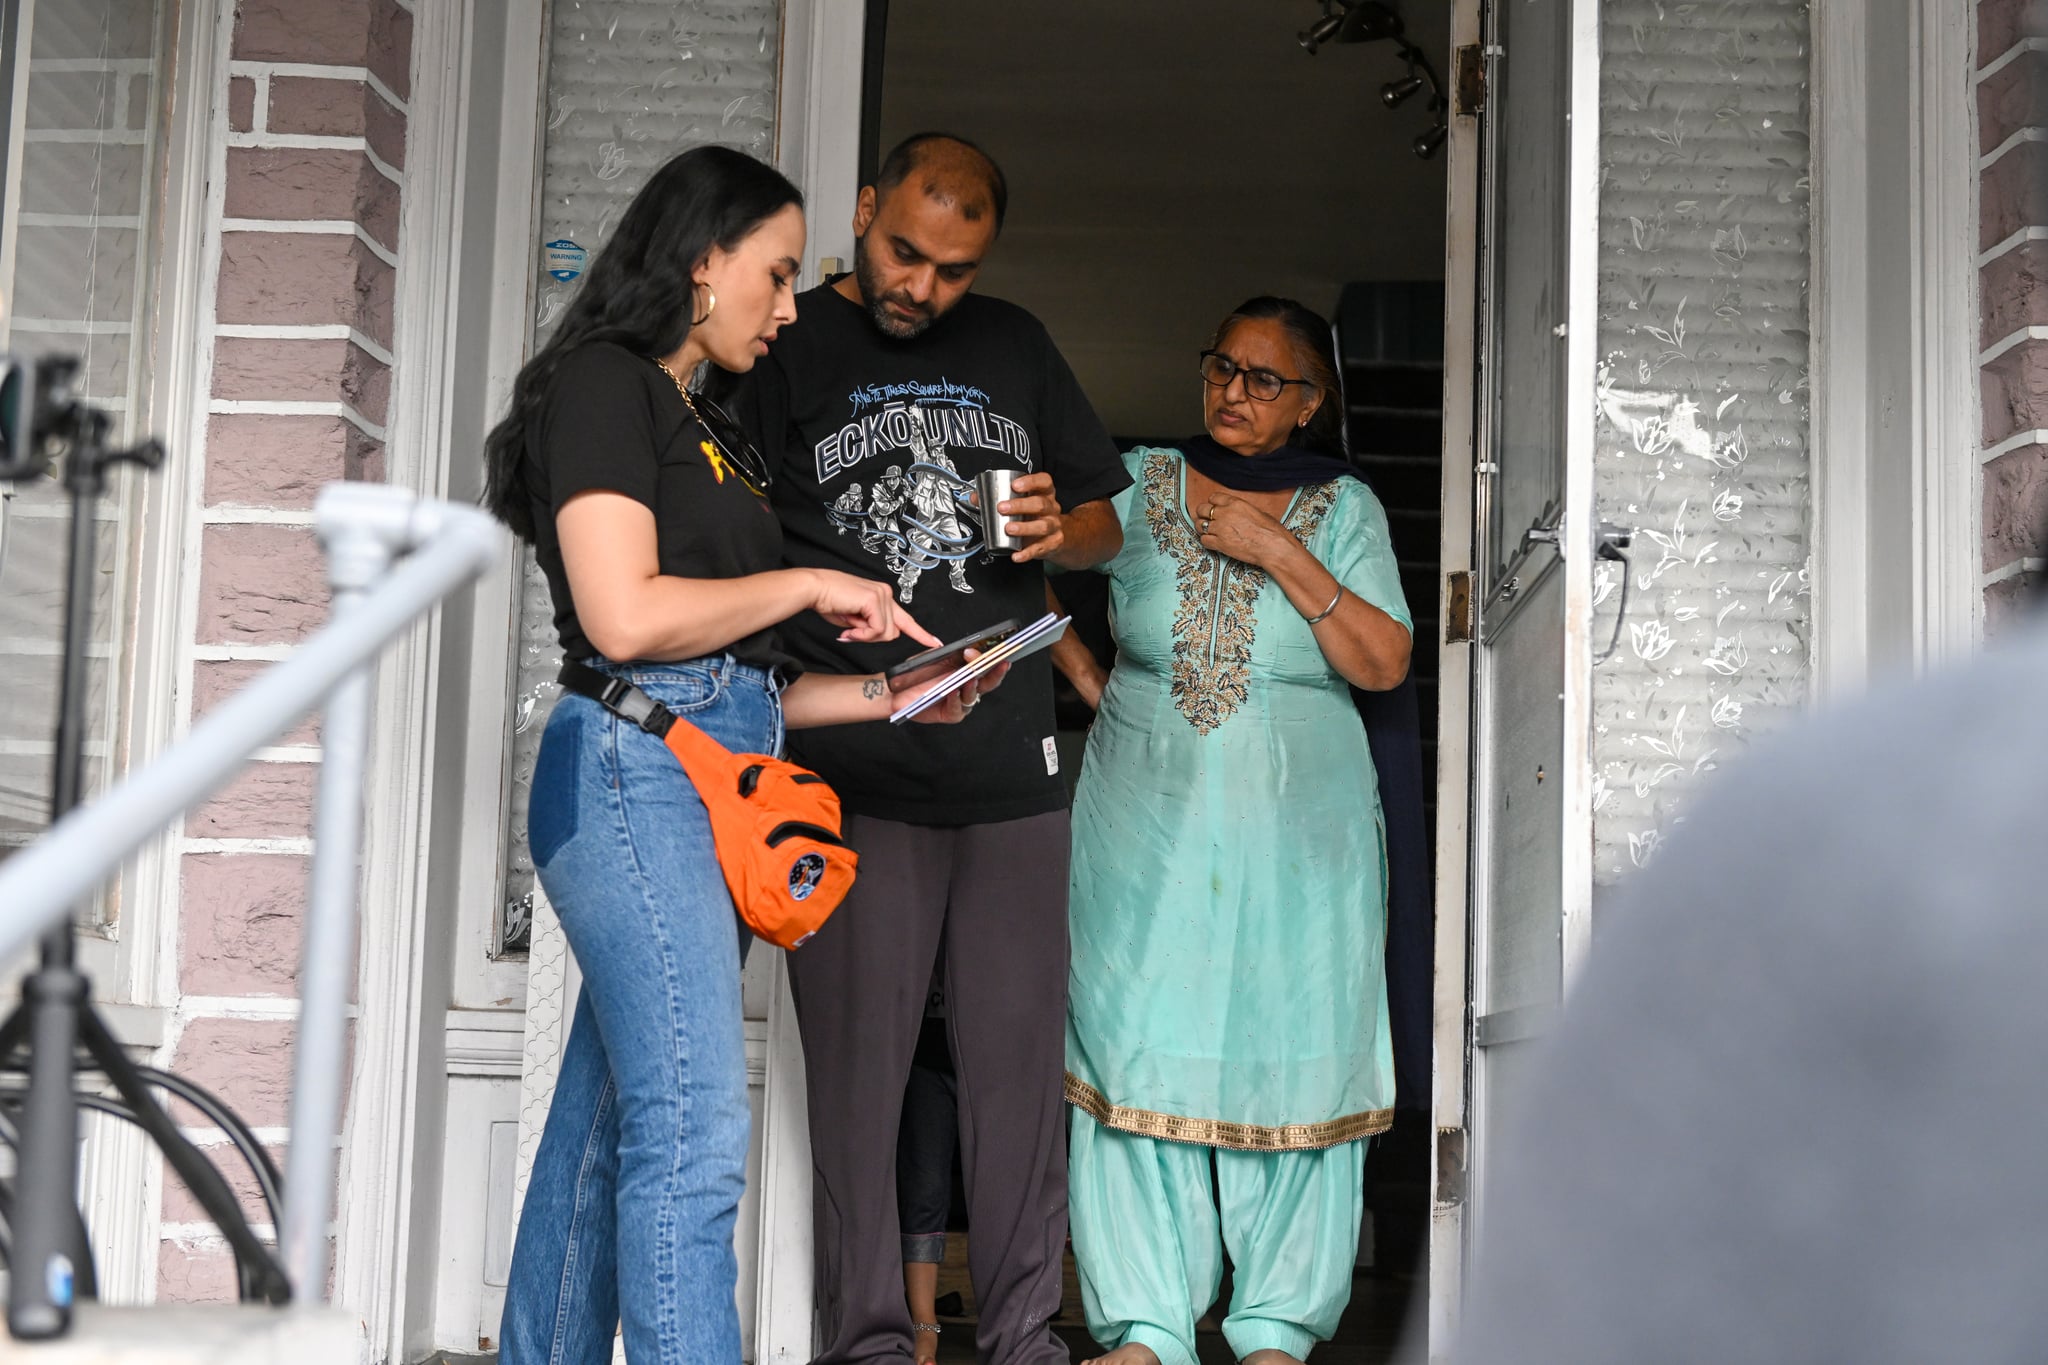 PHILADELPHIA, PENNSYLVANIA - NOVEMBER 06: Meena Harris speaks with voters during the South Asian Women Get Out the Vote Canvass Event on November 06, 2022 in Philadelphia, Pennsylvania. (Photo by Daniel Zuchnik/Getty Images for Indian American Impact)